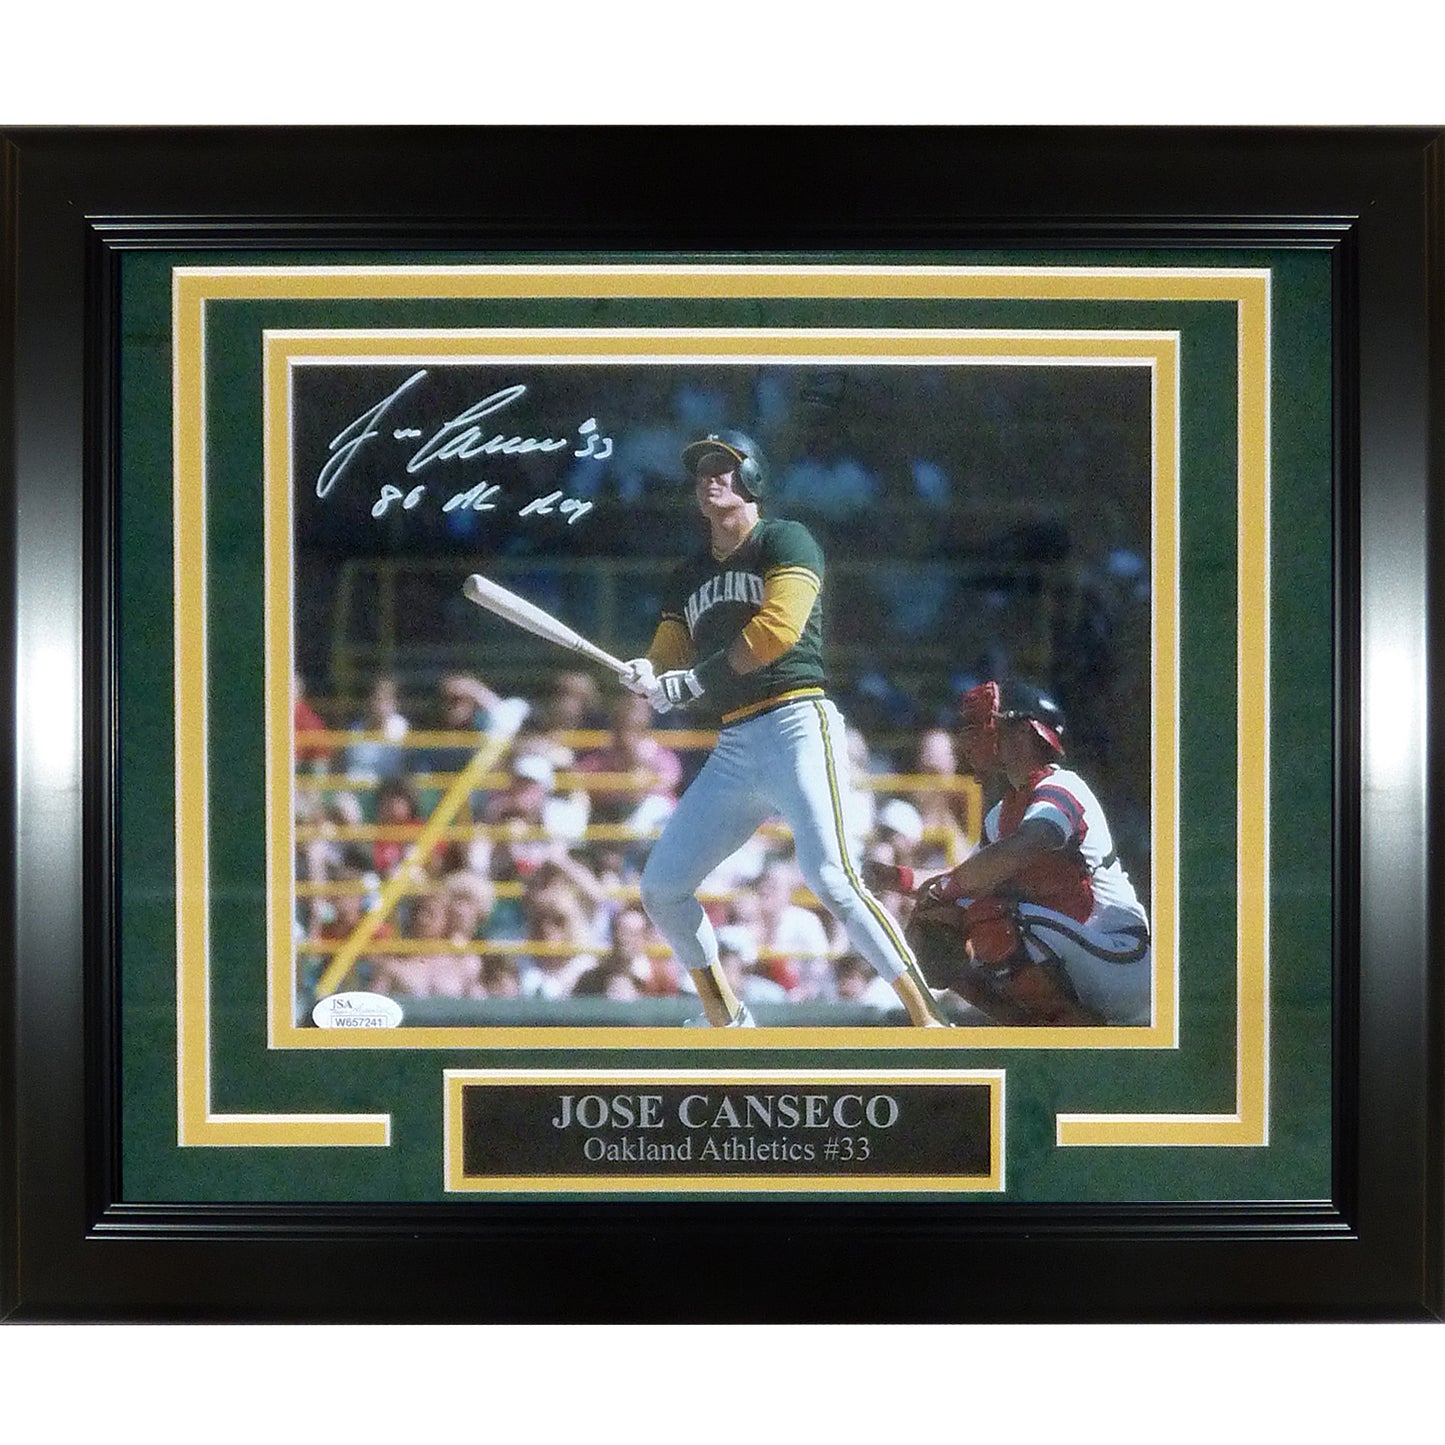 Jose Canseco Autographed Oakland Athletics Deluxe Framed 8x10 Photo – Beckett